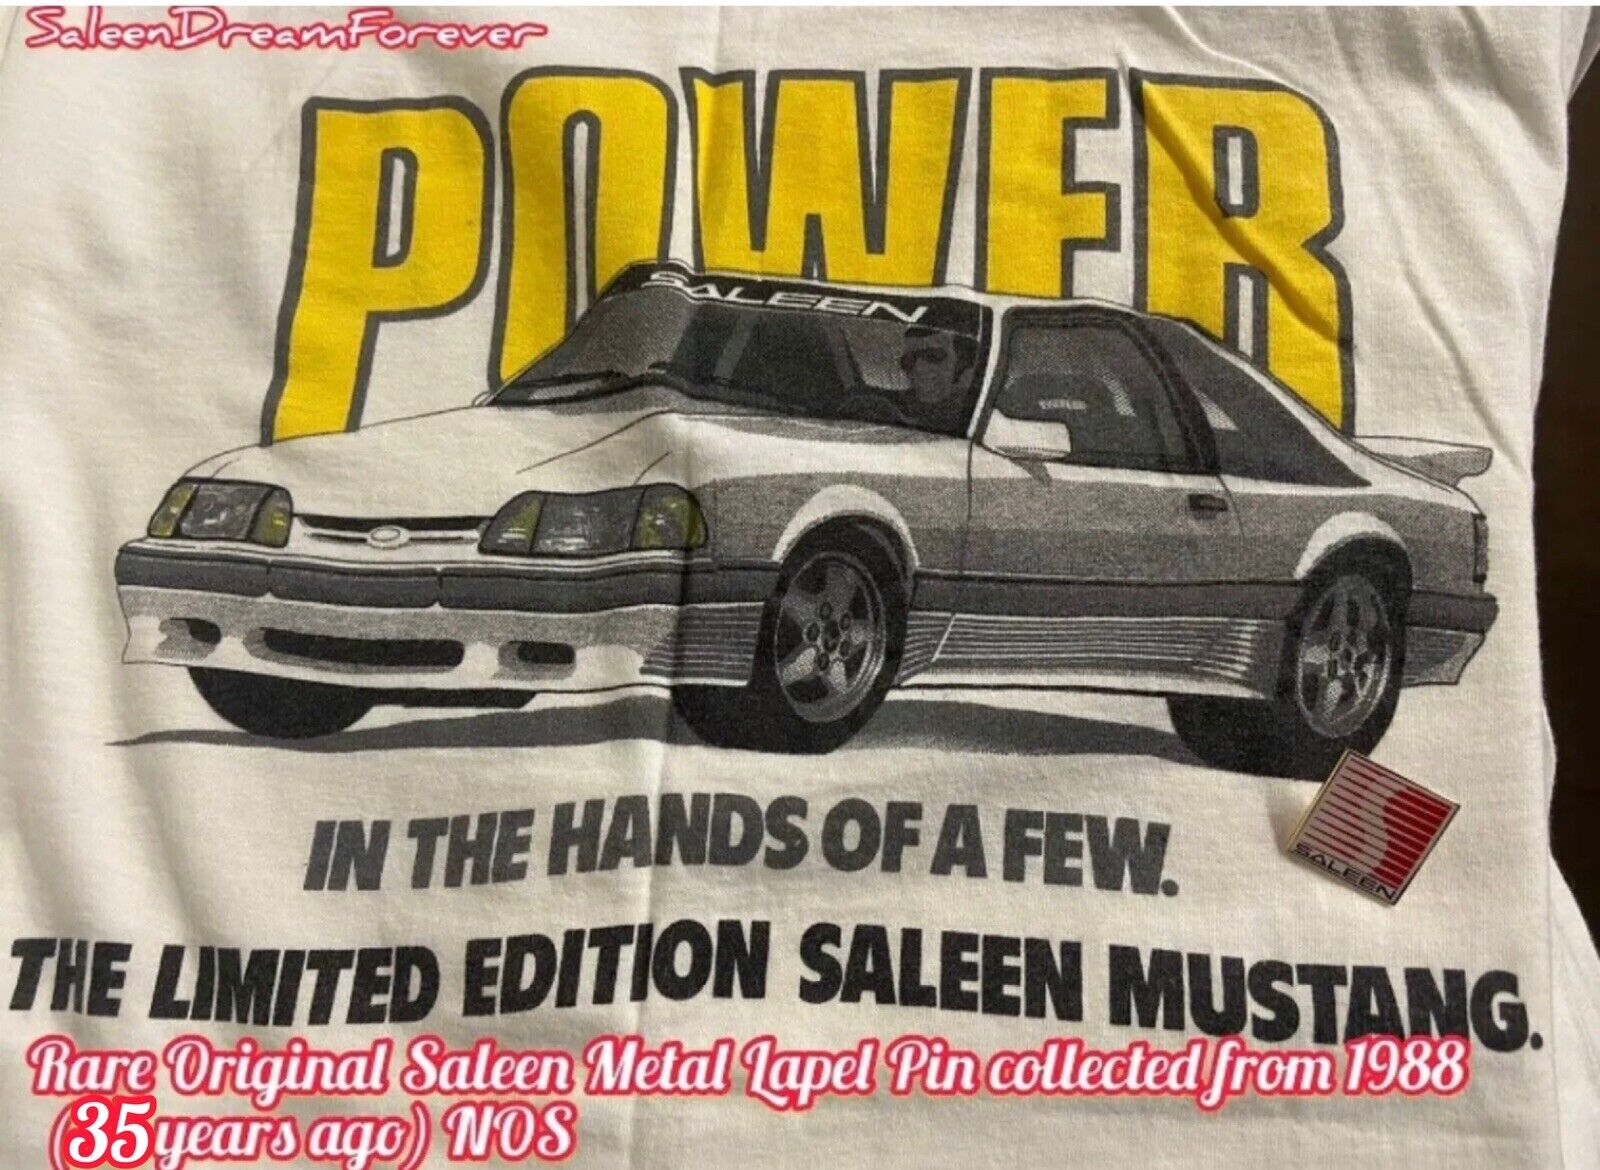 RARE SALEEN METAL LAPEL PIN FRM 1988 NOS FOXBODY SSC MUSTANG FORD GT 302 5.0  